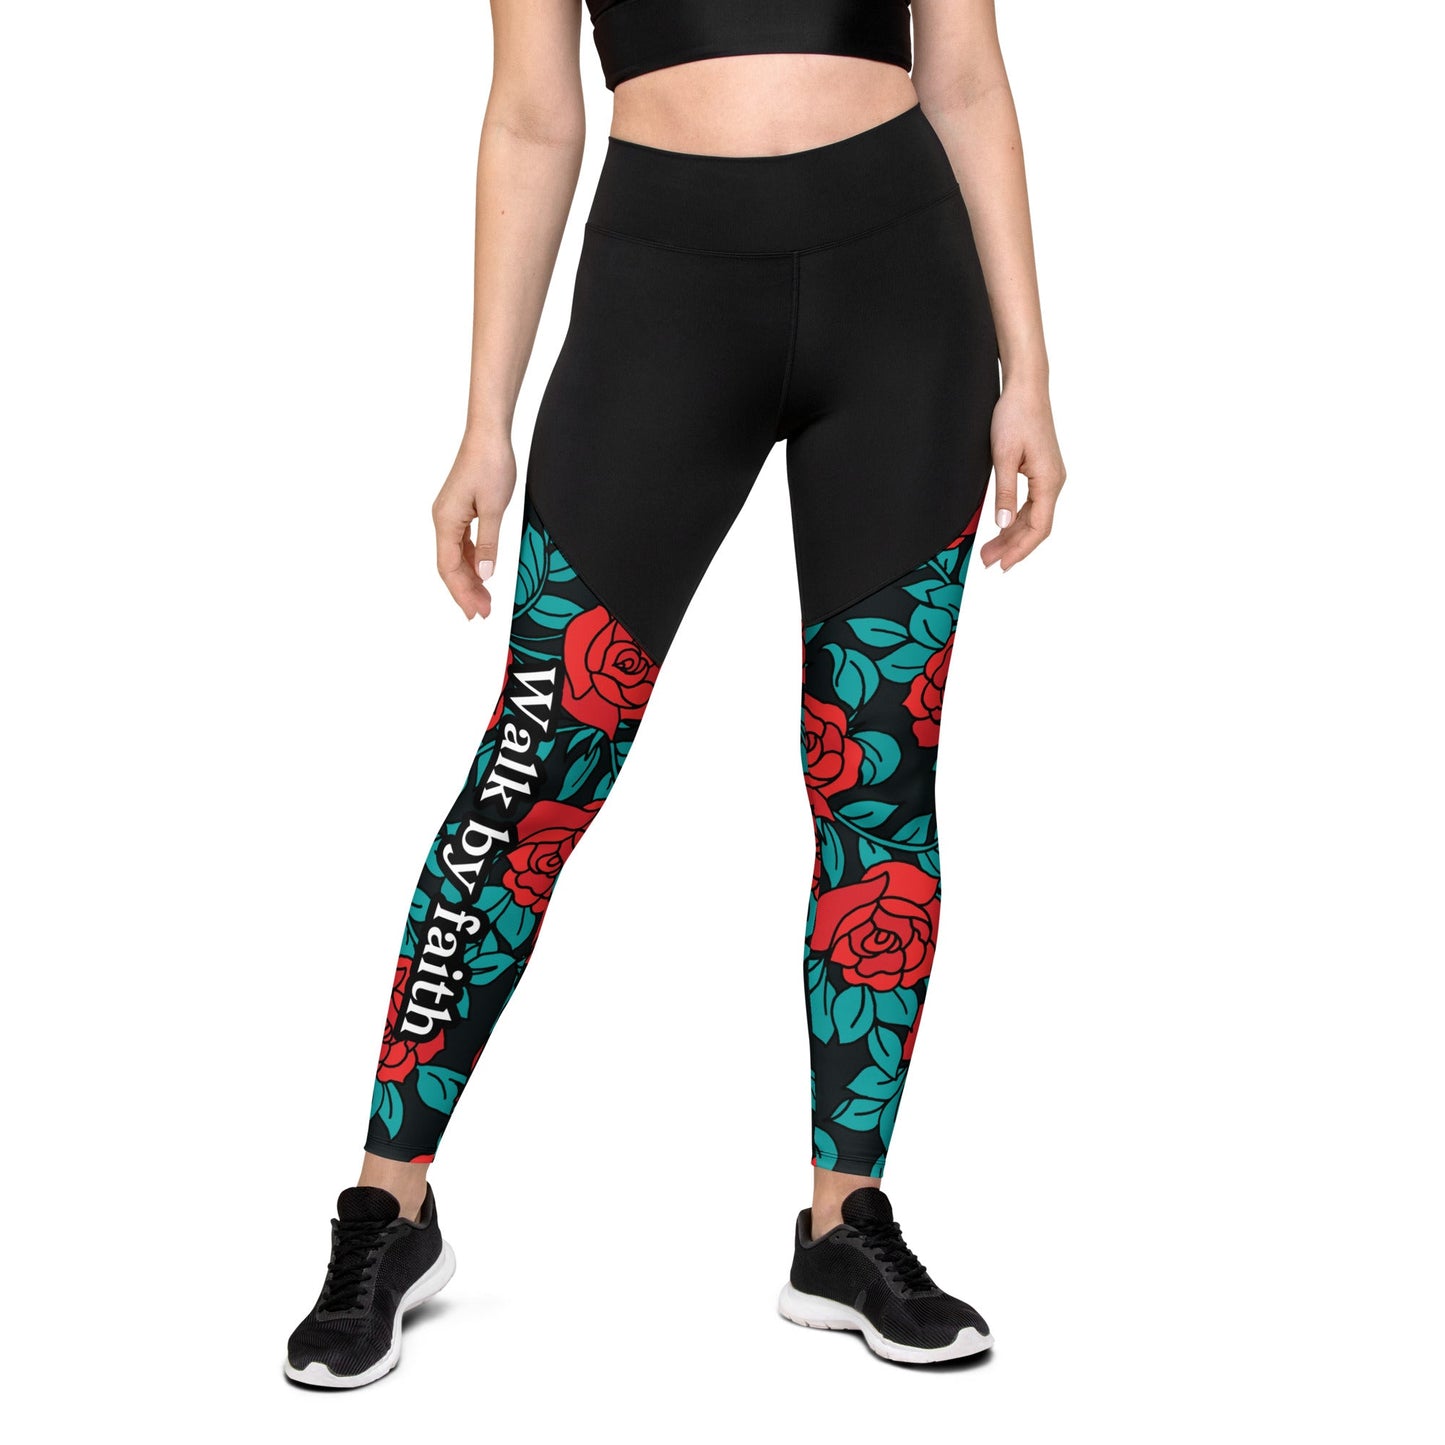 Compression Sport Leggings "Walk by faith, not by sight!" Red Roses - faithbook